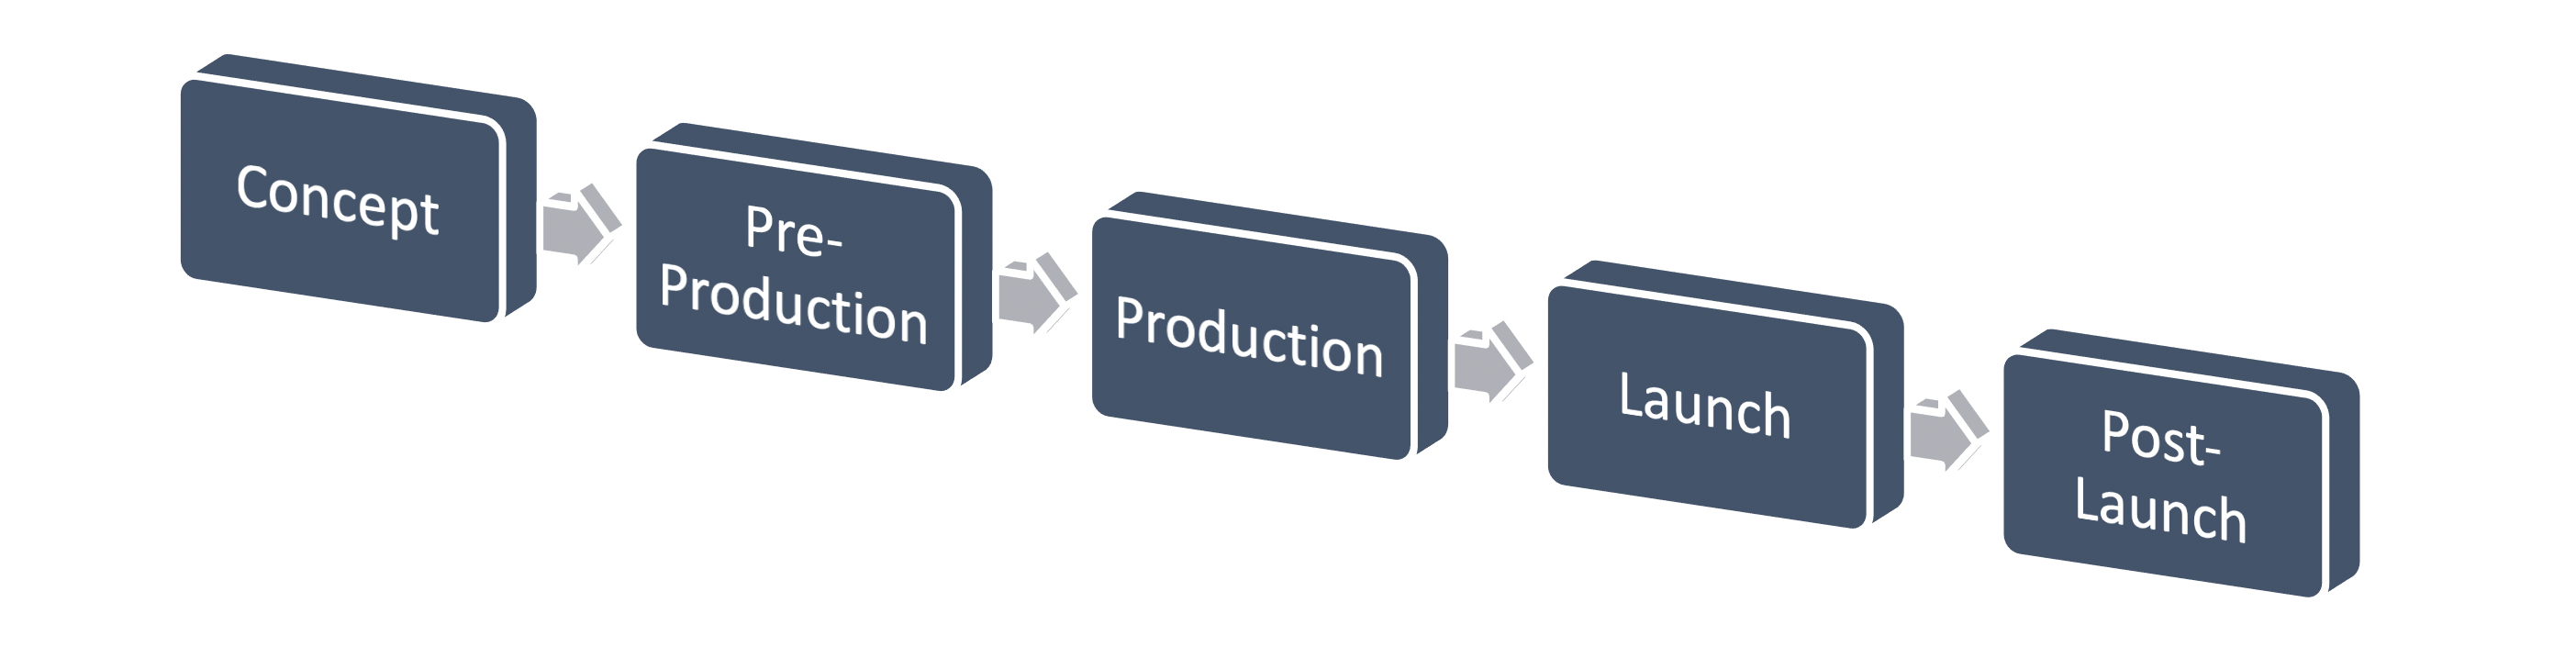 Arrows indicating the process: concept, pre-production, production, launch, and post-launch.